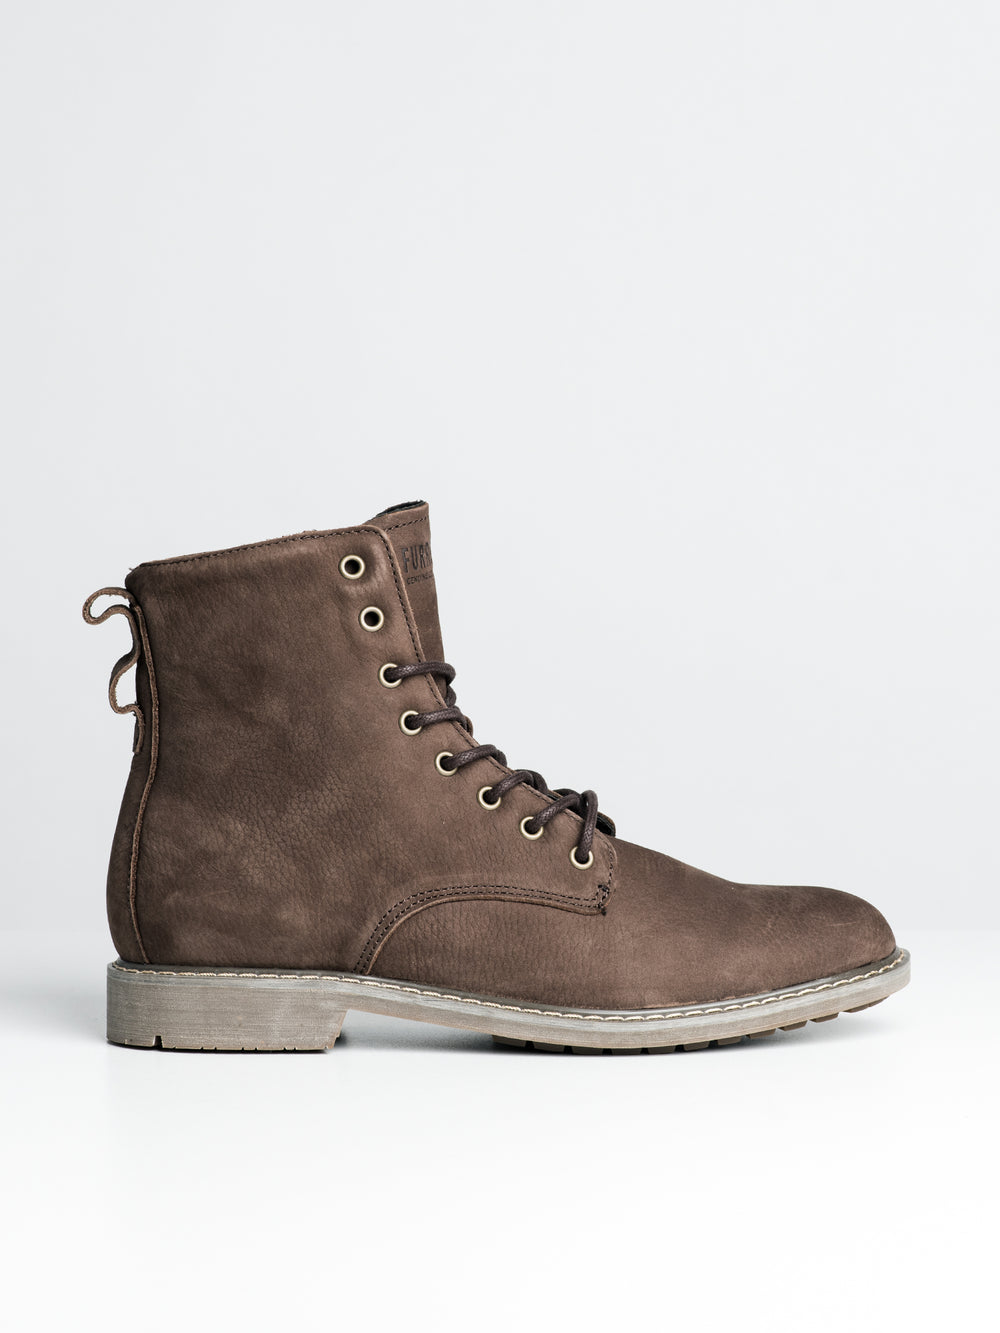 MENS CAMERON BOOT - CLEARANCE